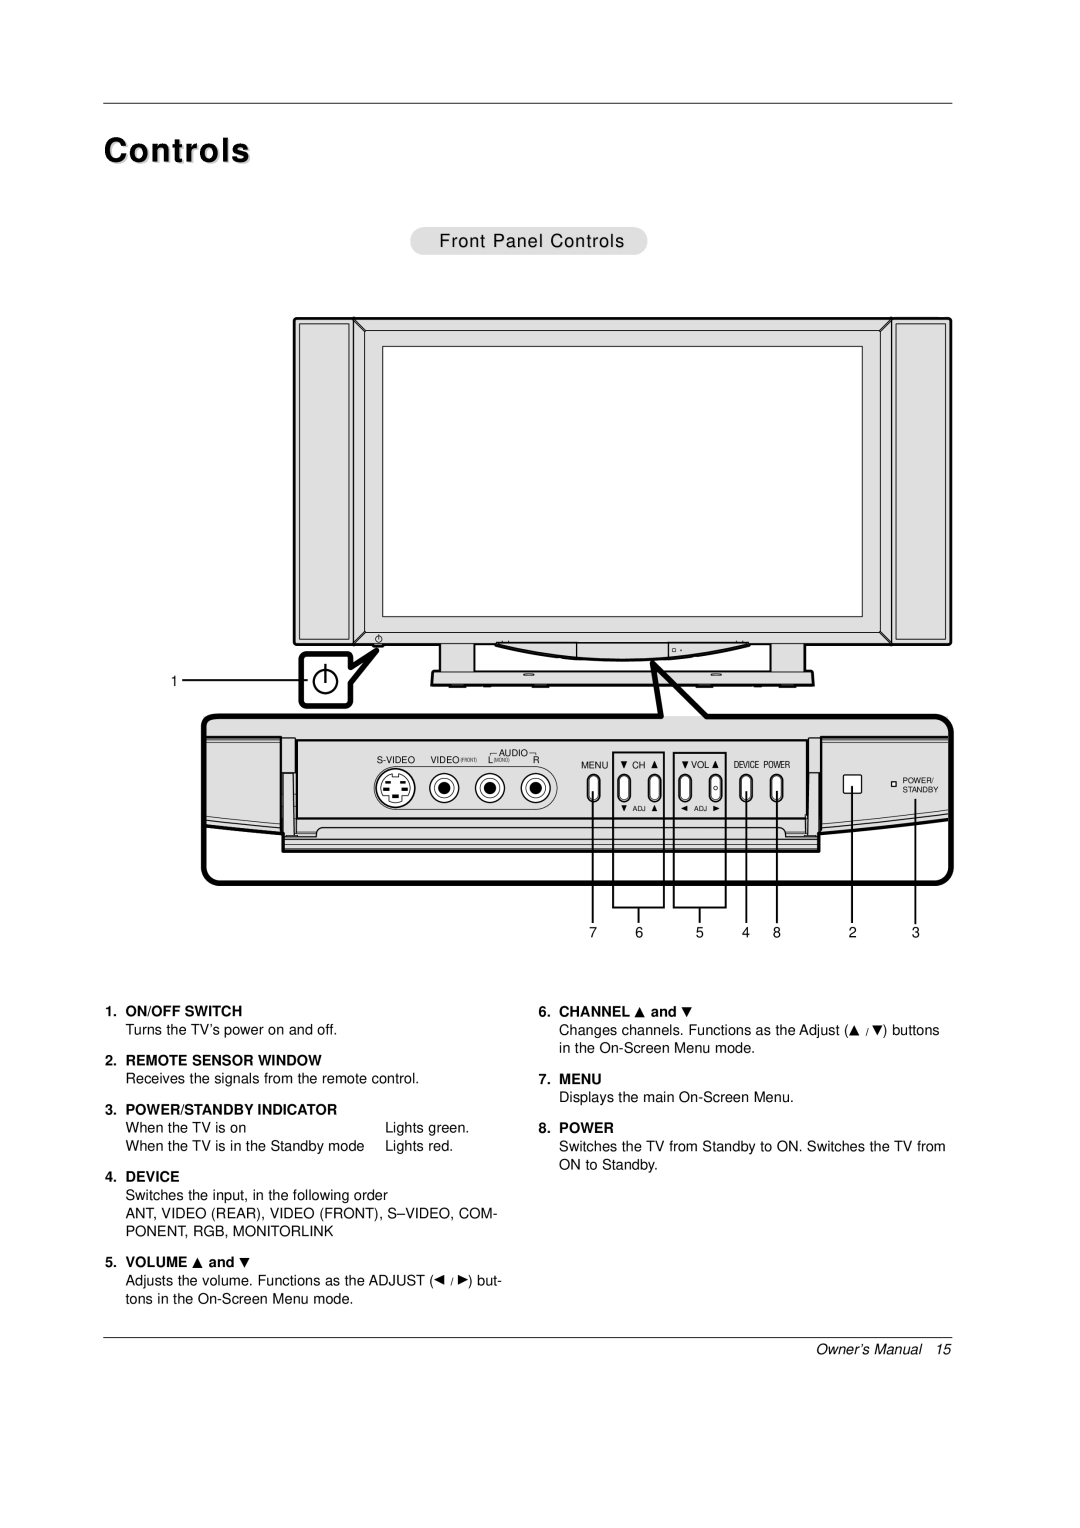 Mitsubishi Electronics PD-4225S manual Controls, On/Off Switch, CHANNEL D and E, Remote Sensor Window, Menu, Power, Device 